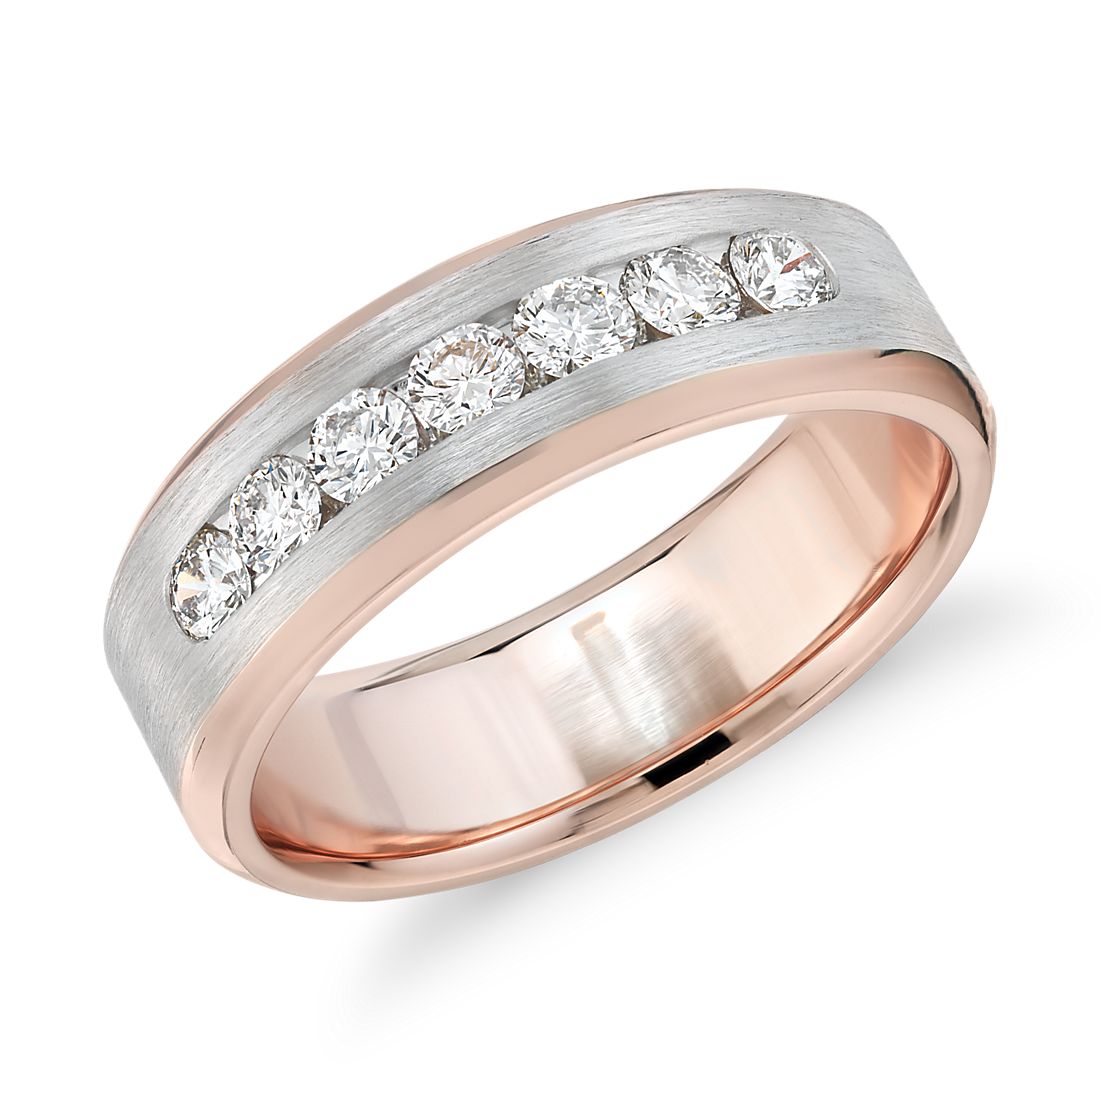 Two-Tone Channel-Set Diamond Ring in 14k White and Rose Gold (3/4 ct. tw.)